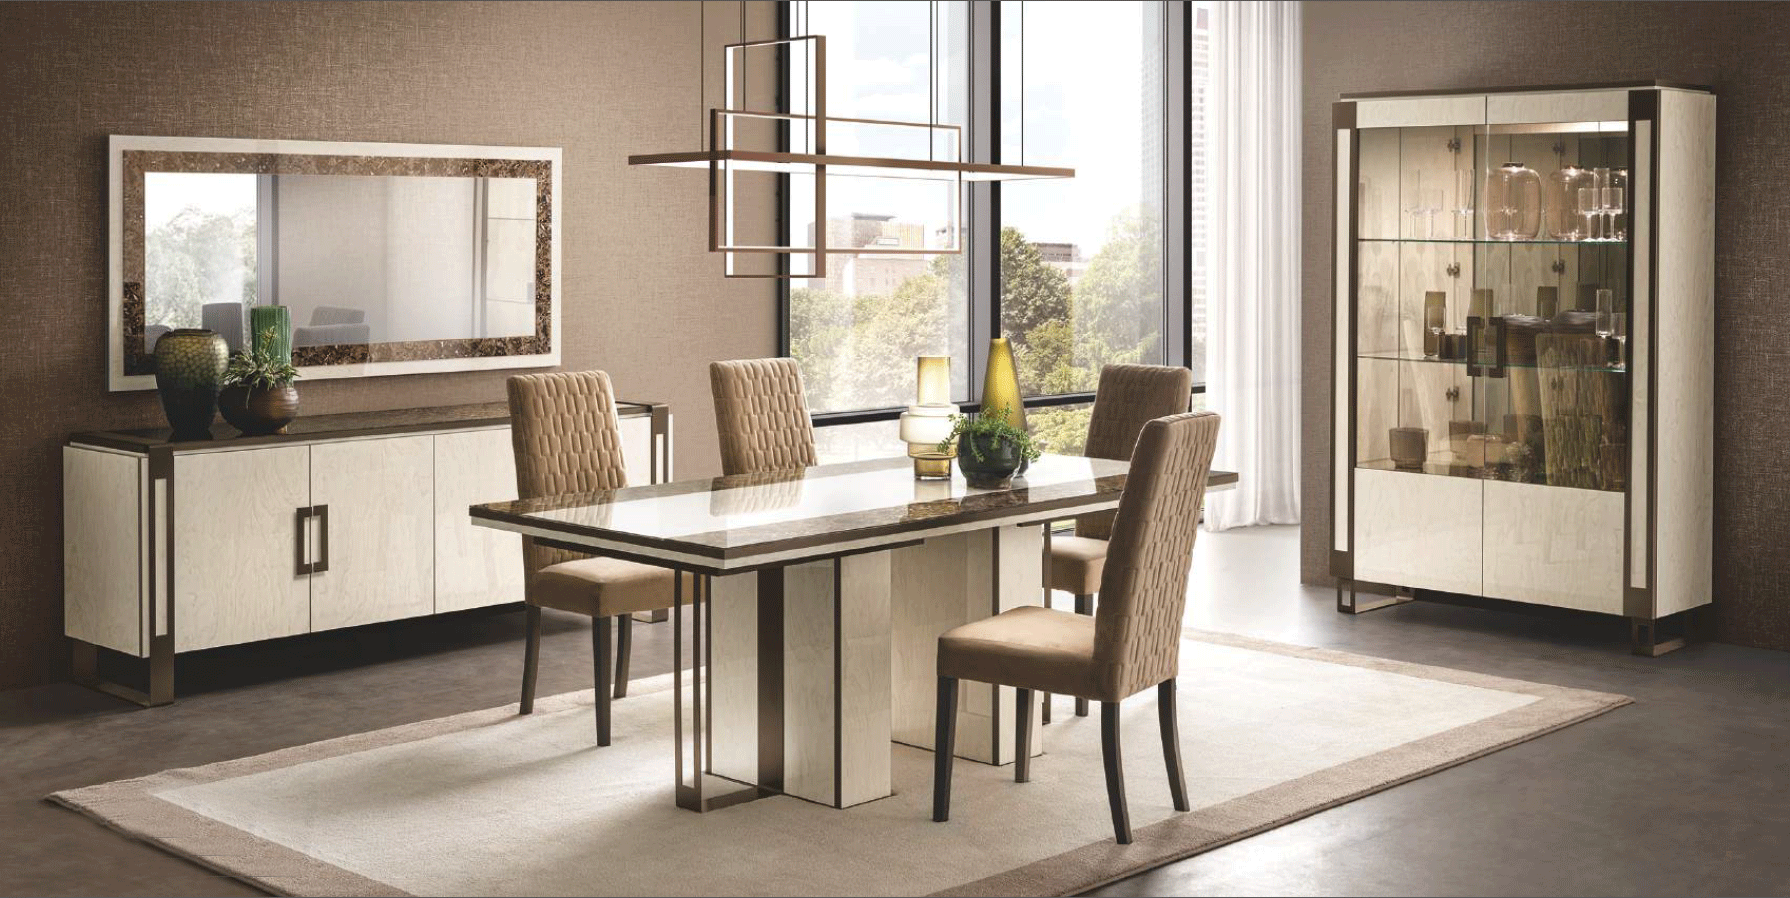 Wallunits Hallway Console tables and Mirrors Poesia Dining room Additional items